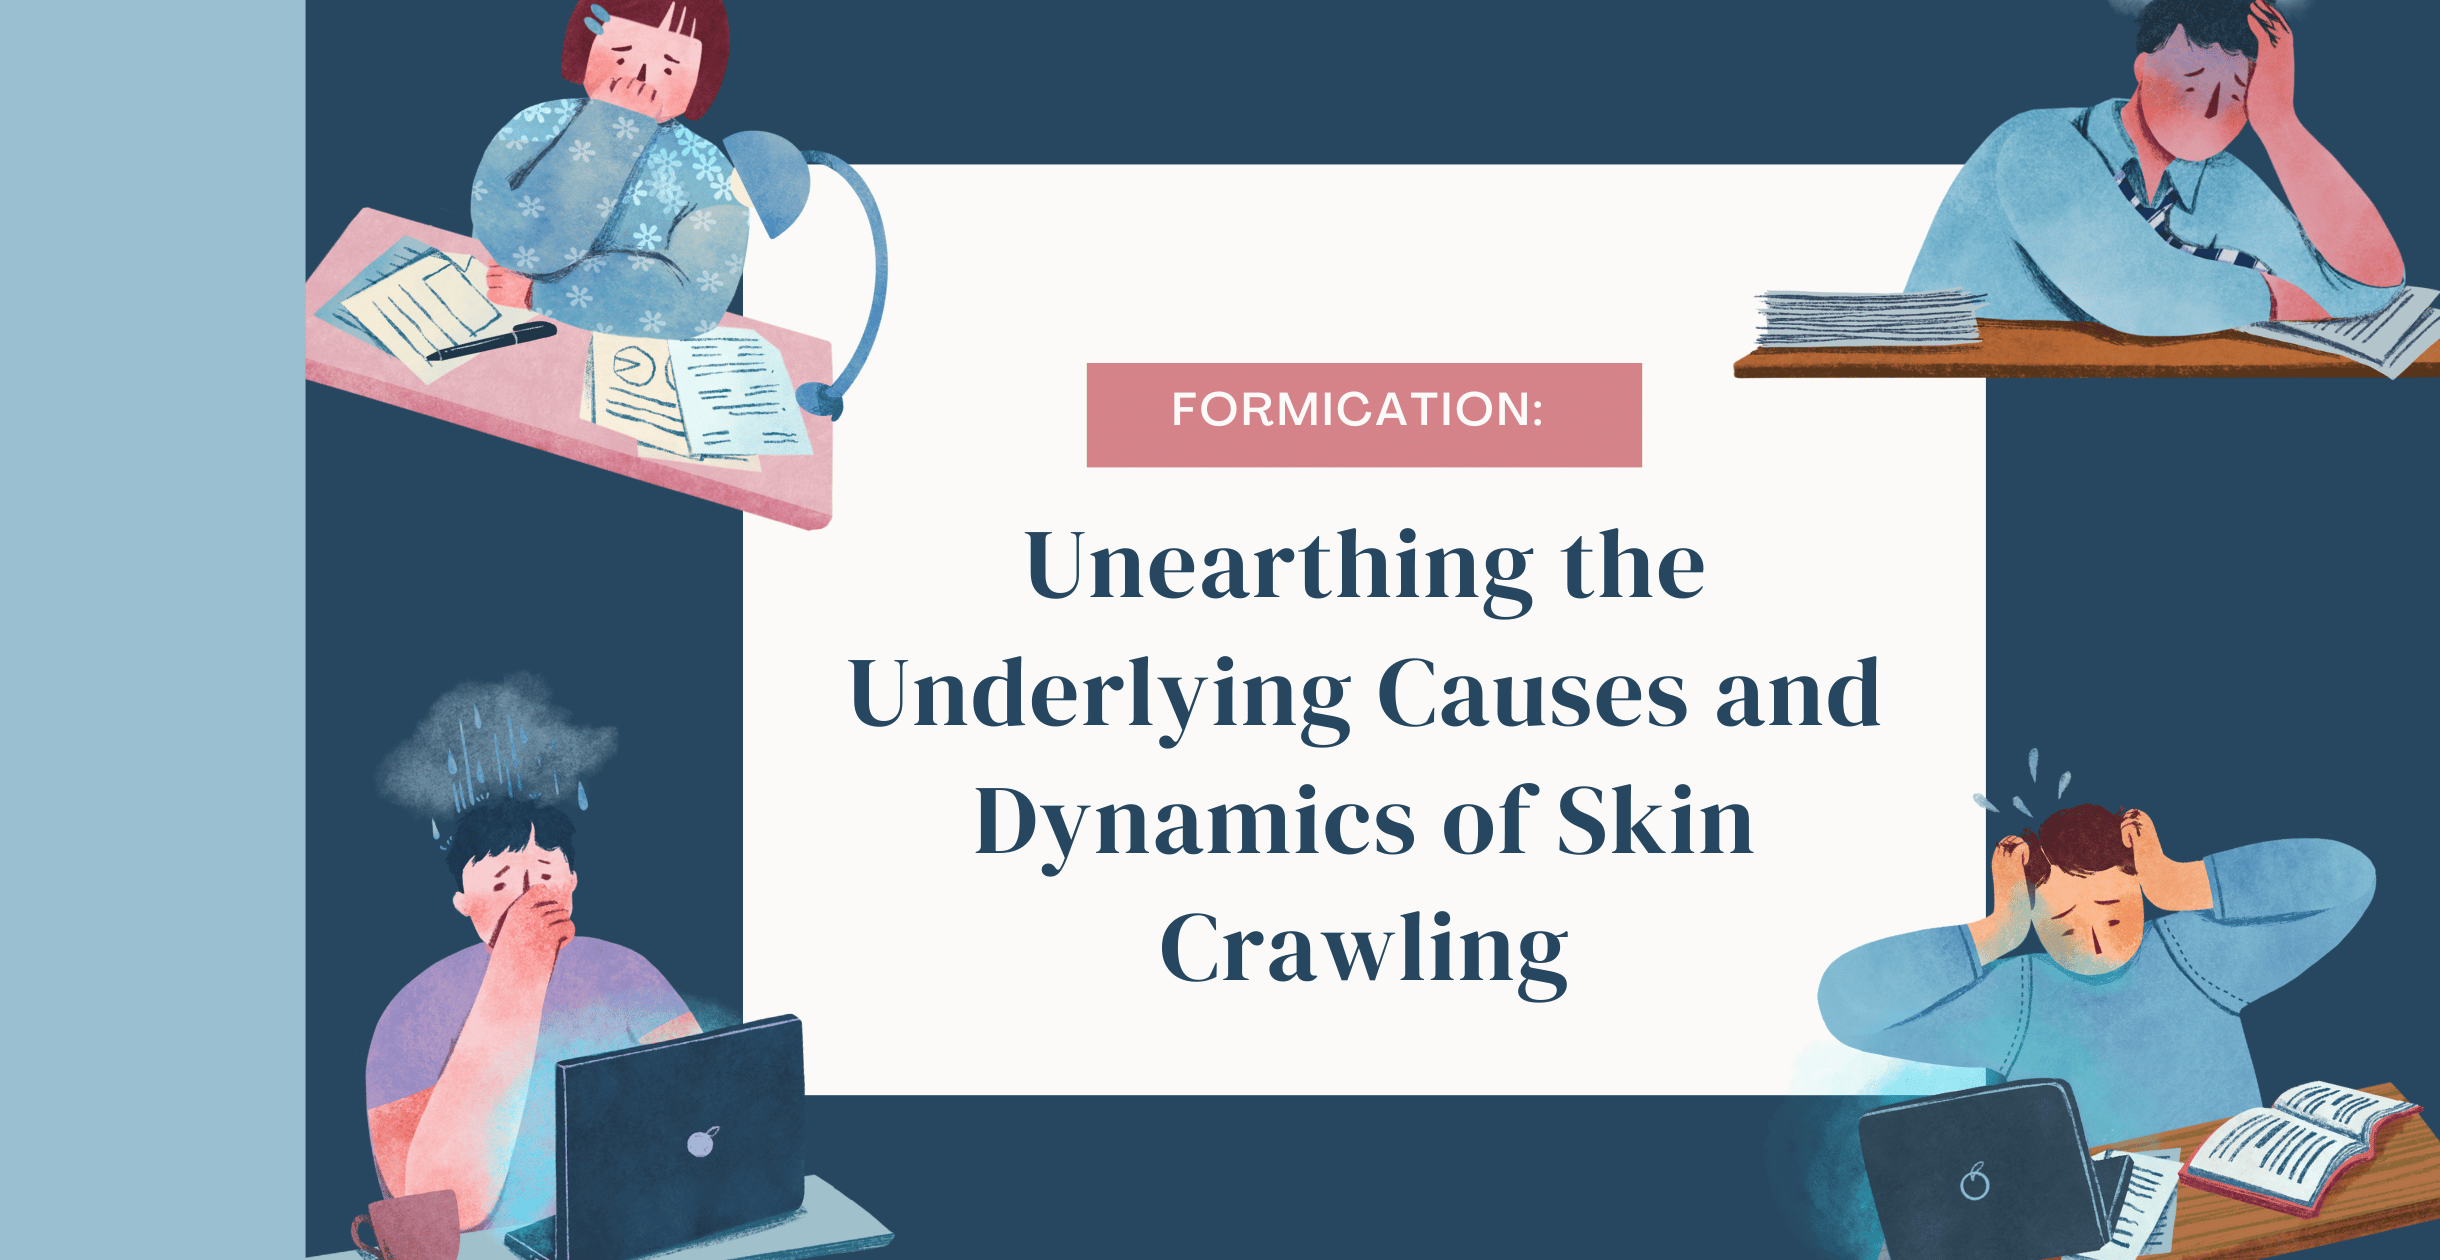 Formication: Unearthing the Underlying Causes and Dynamics of Skin Crawling